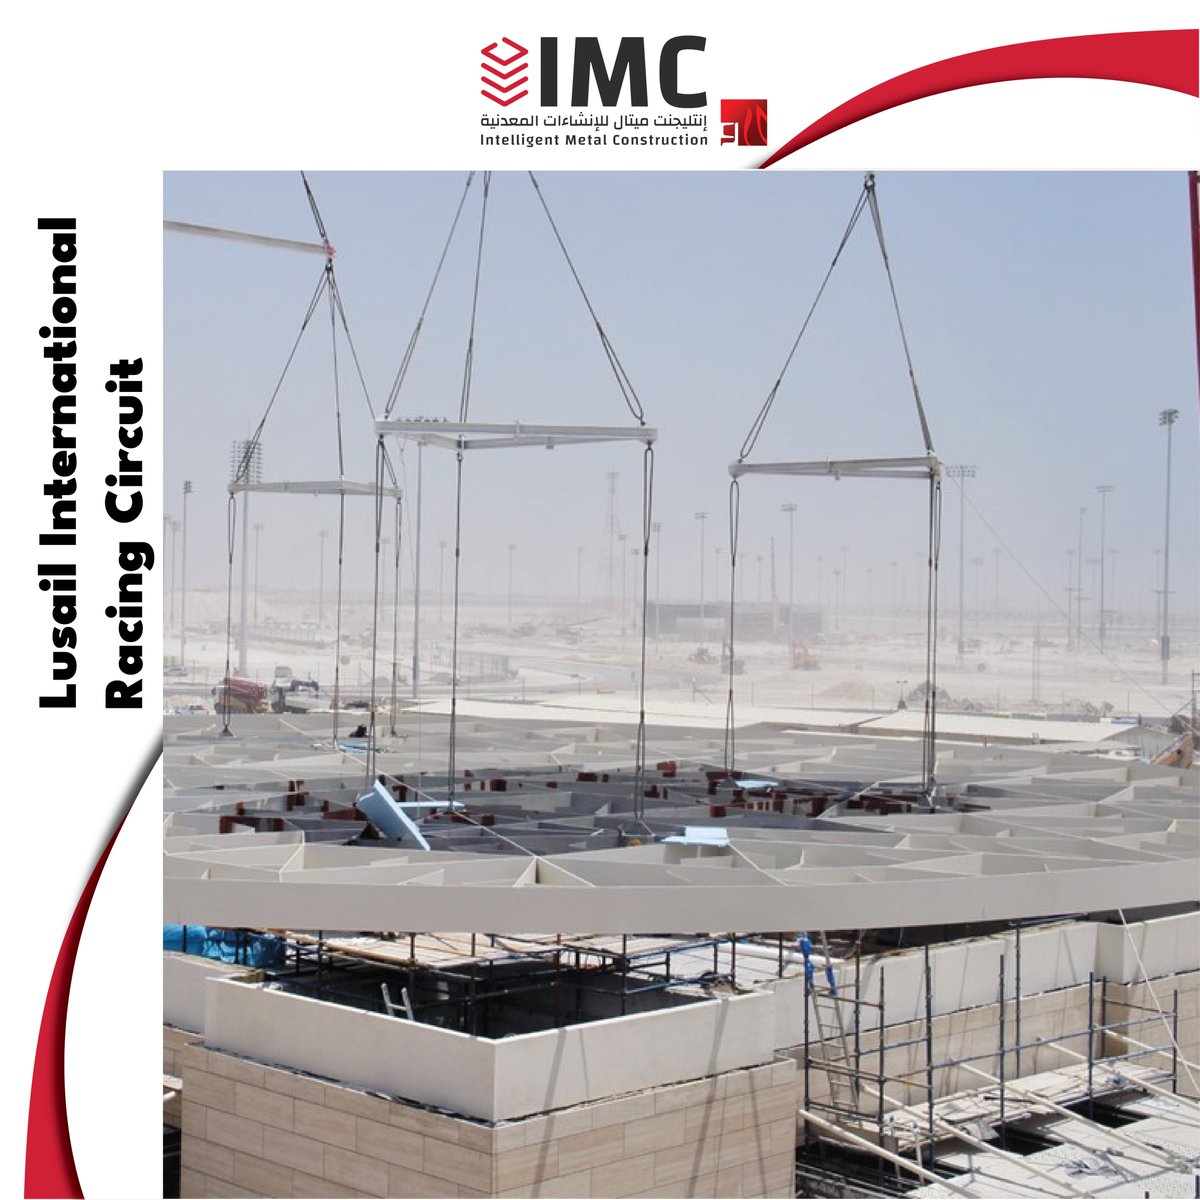 Building dreams, one steel beam at a time. Explore our innovative construction solutions today! #BuildingQatar #SteelArtistry #Qatar #IMC #IMCGulf Discover more at imcgulf.com | IMC in cobranding and operations agreement with GSE